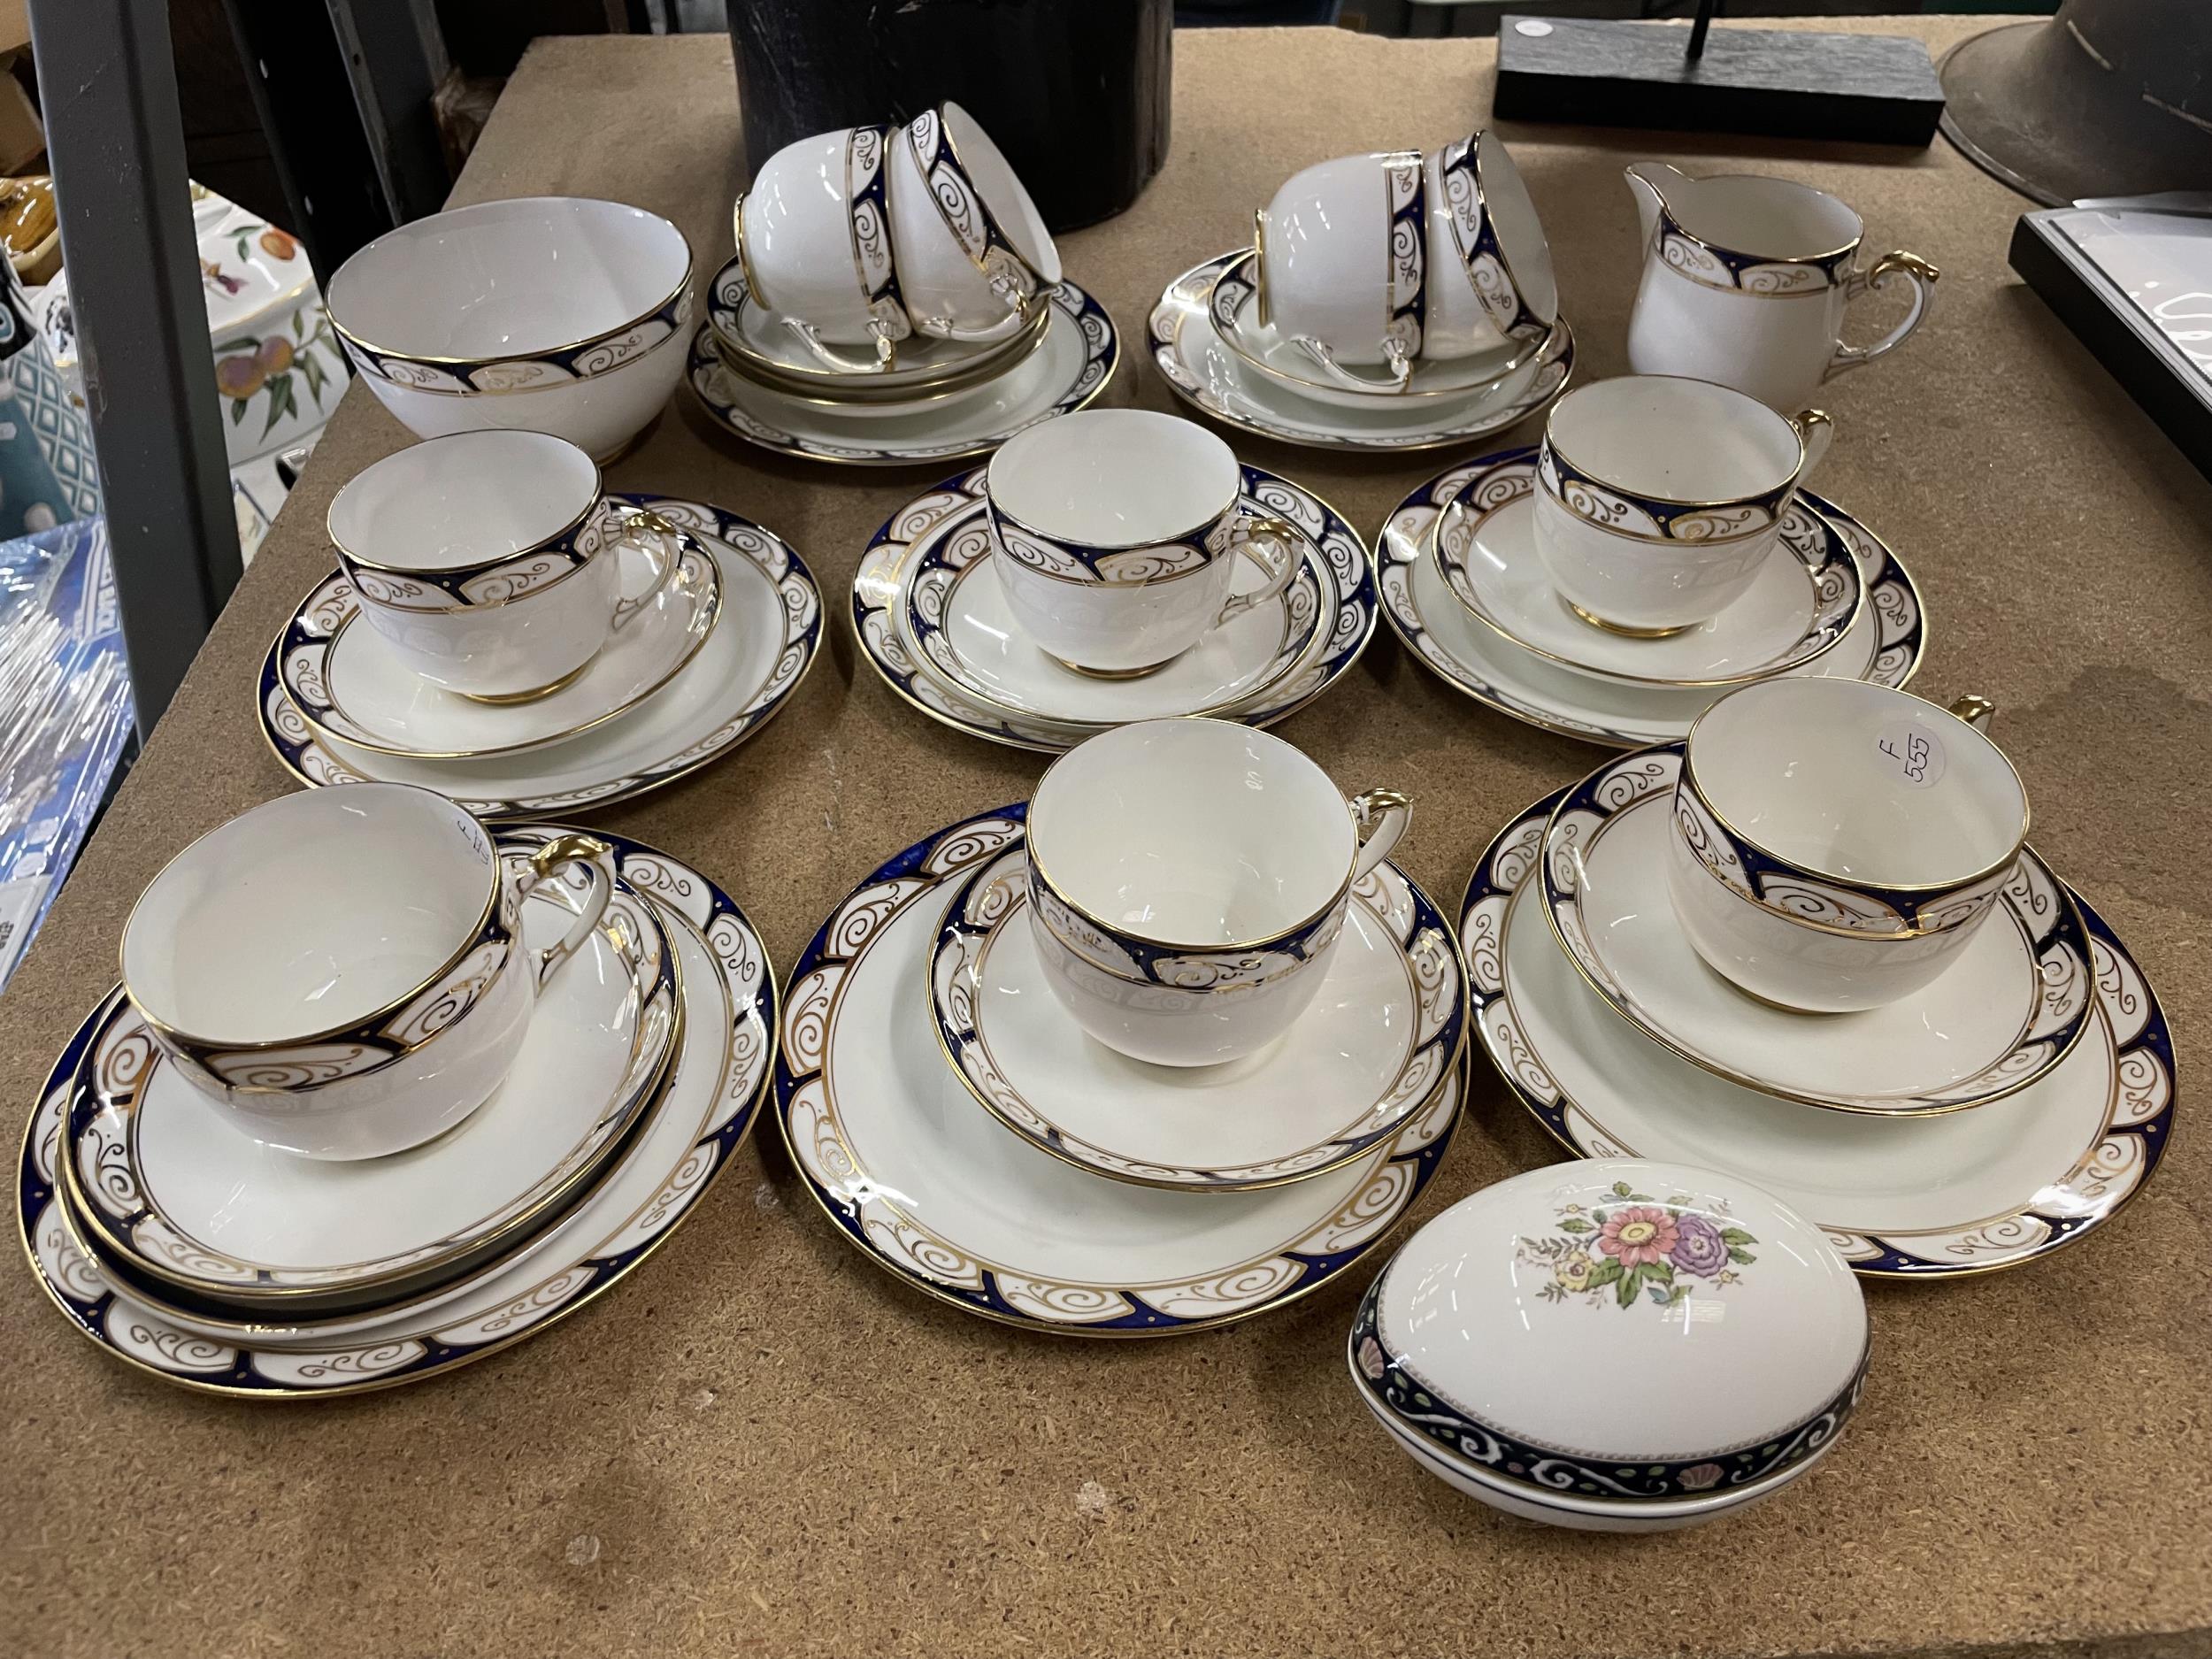 A COLLECTION OF PARAGON CHINA CUPS, SAUCERS, PLATES, ETC